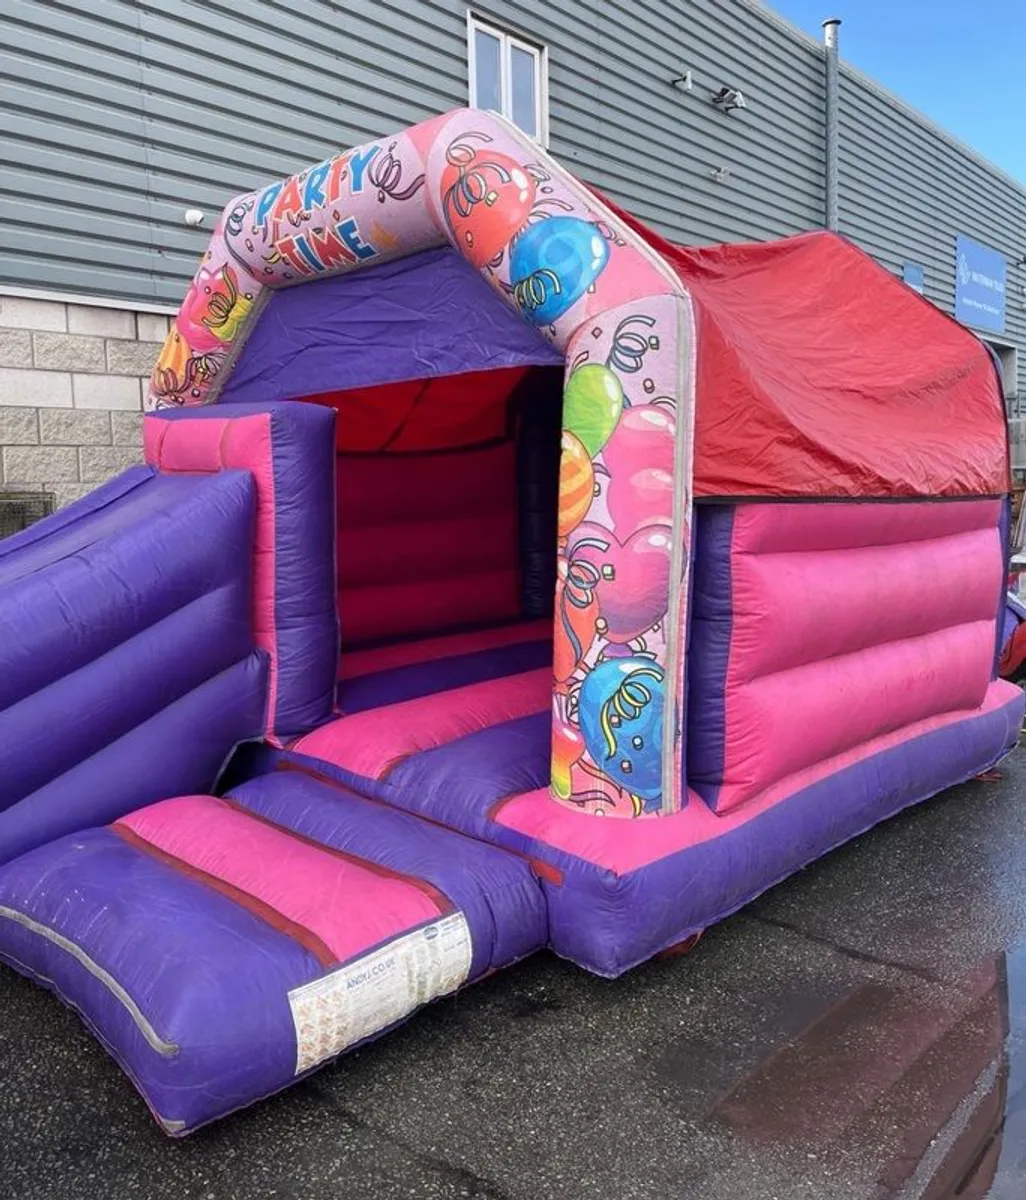 Bouncy Castle with slide for sale - Image 1